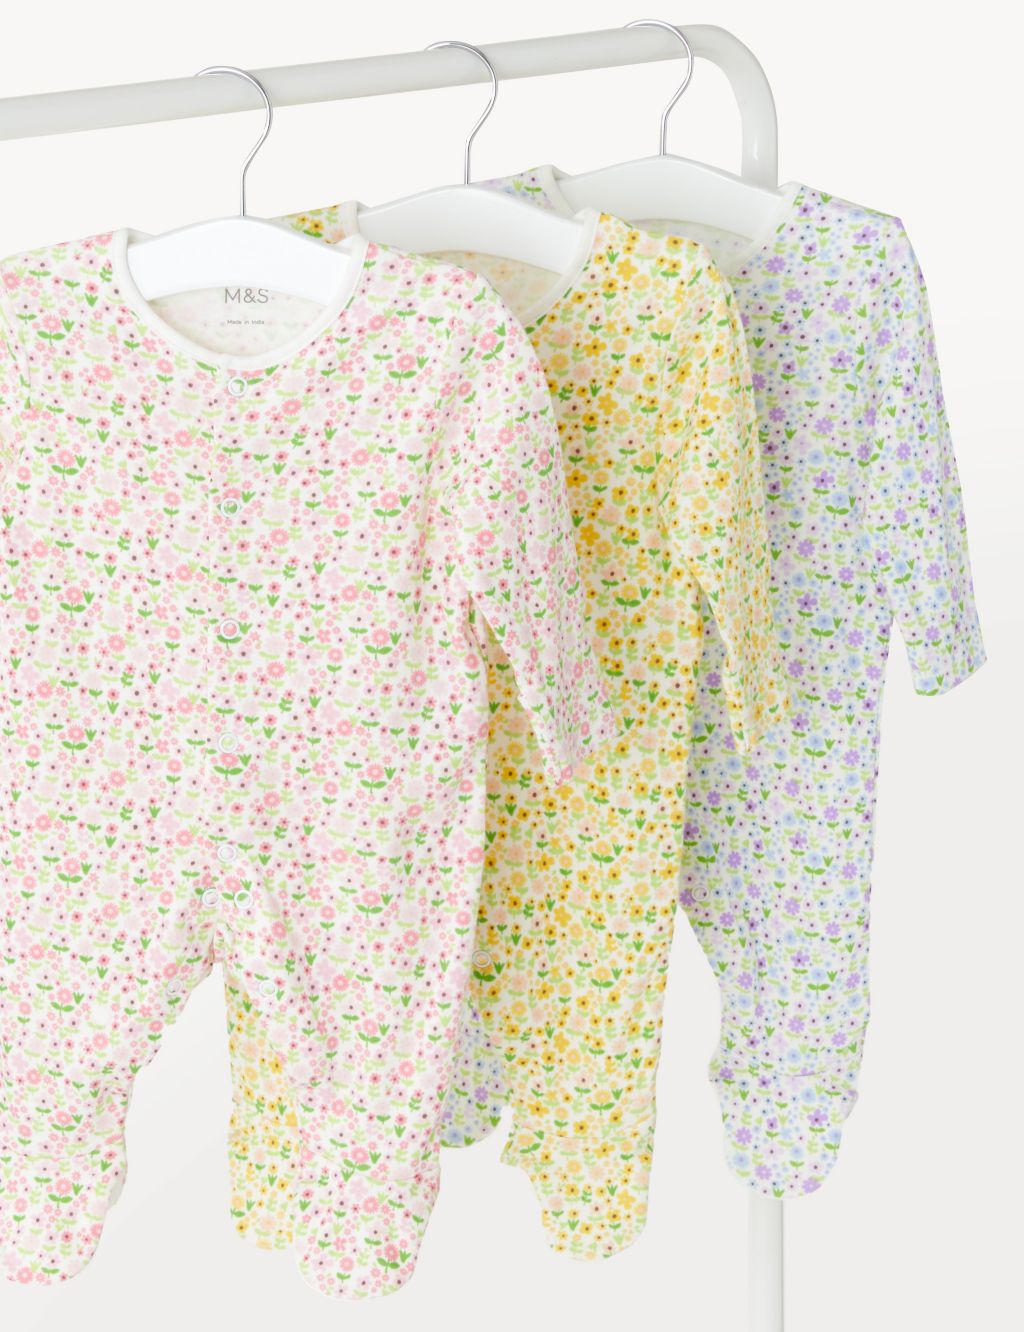 3pk Pure Cotton Floral Sleepsuits (6½lbs-3 Yrs) image 1